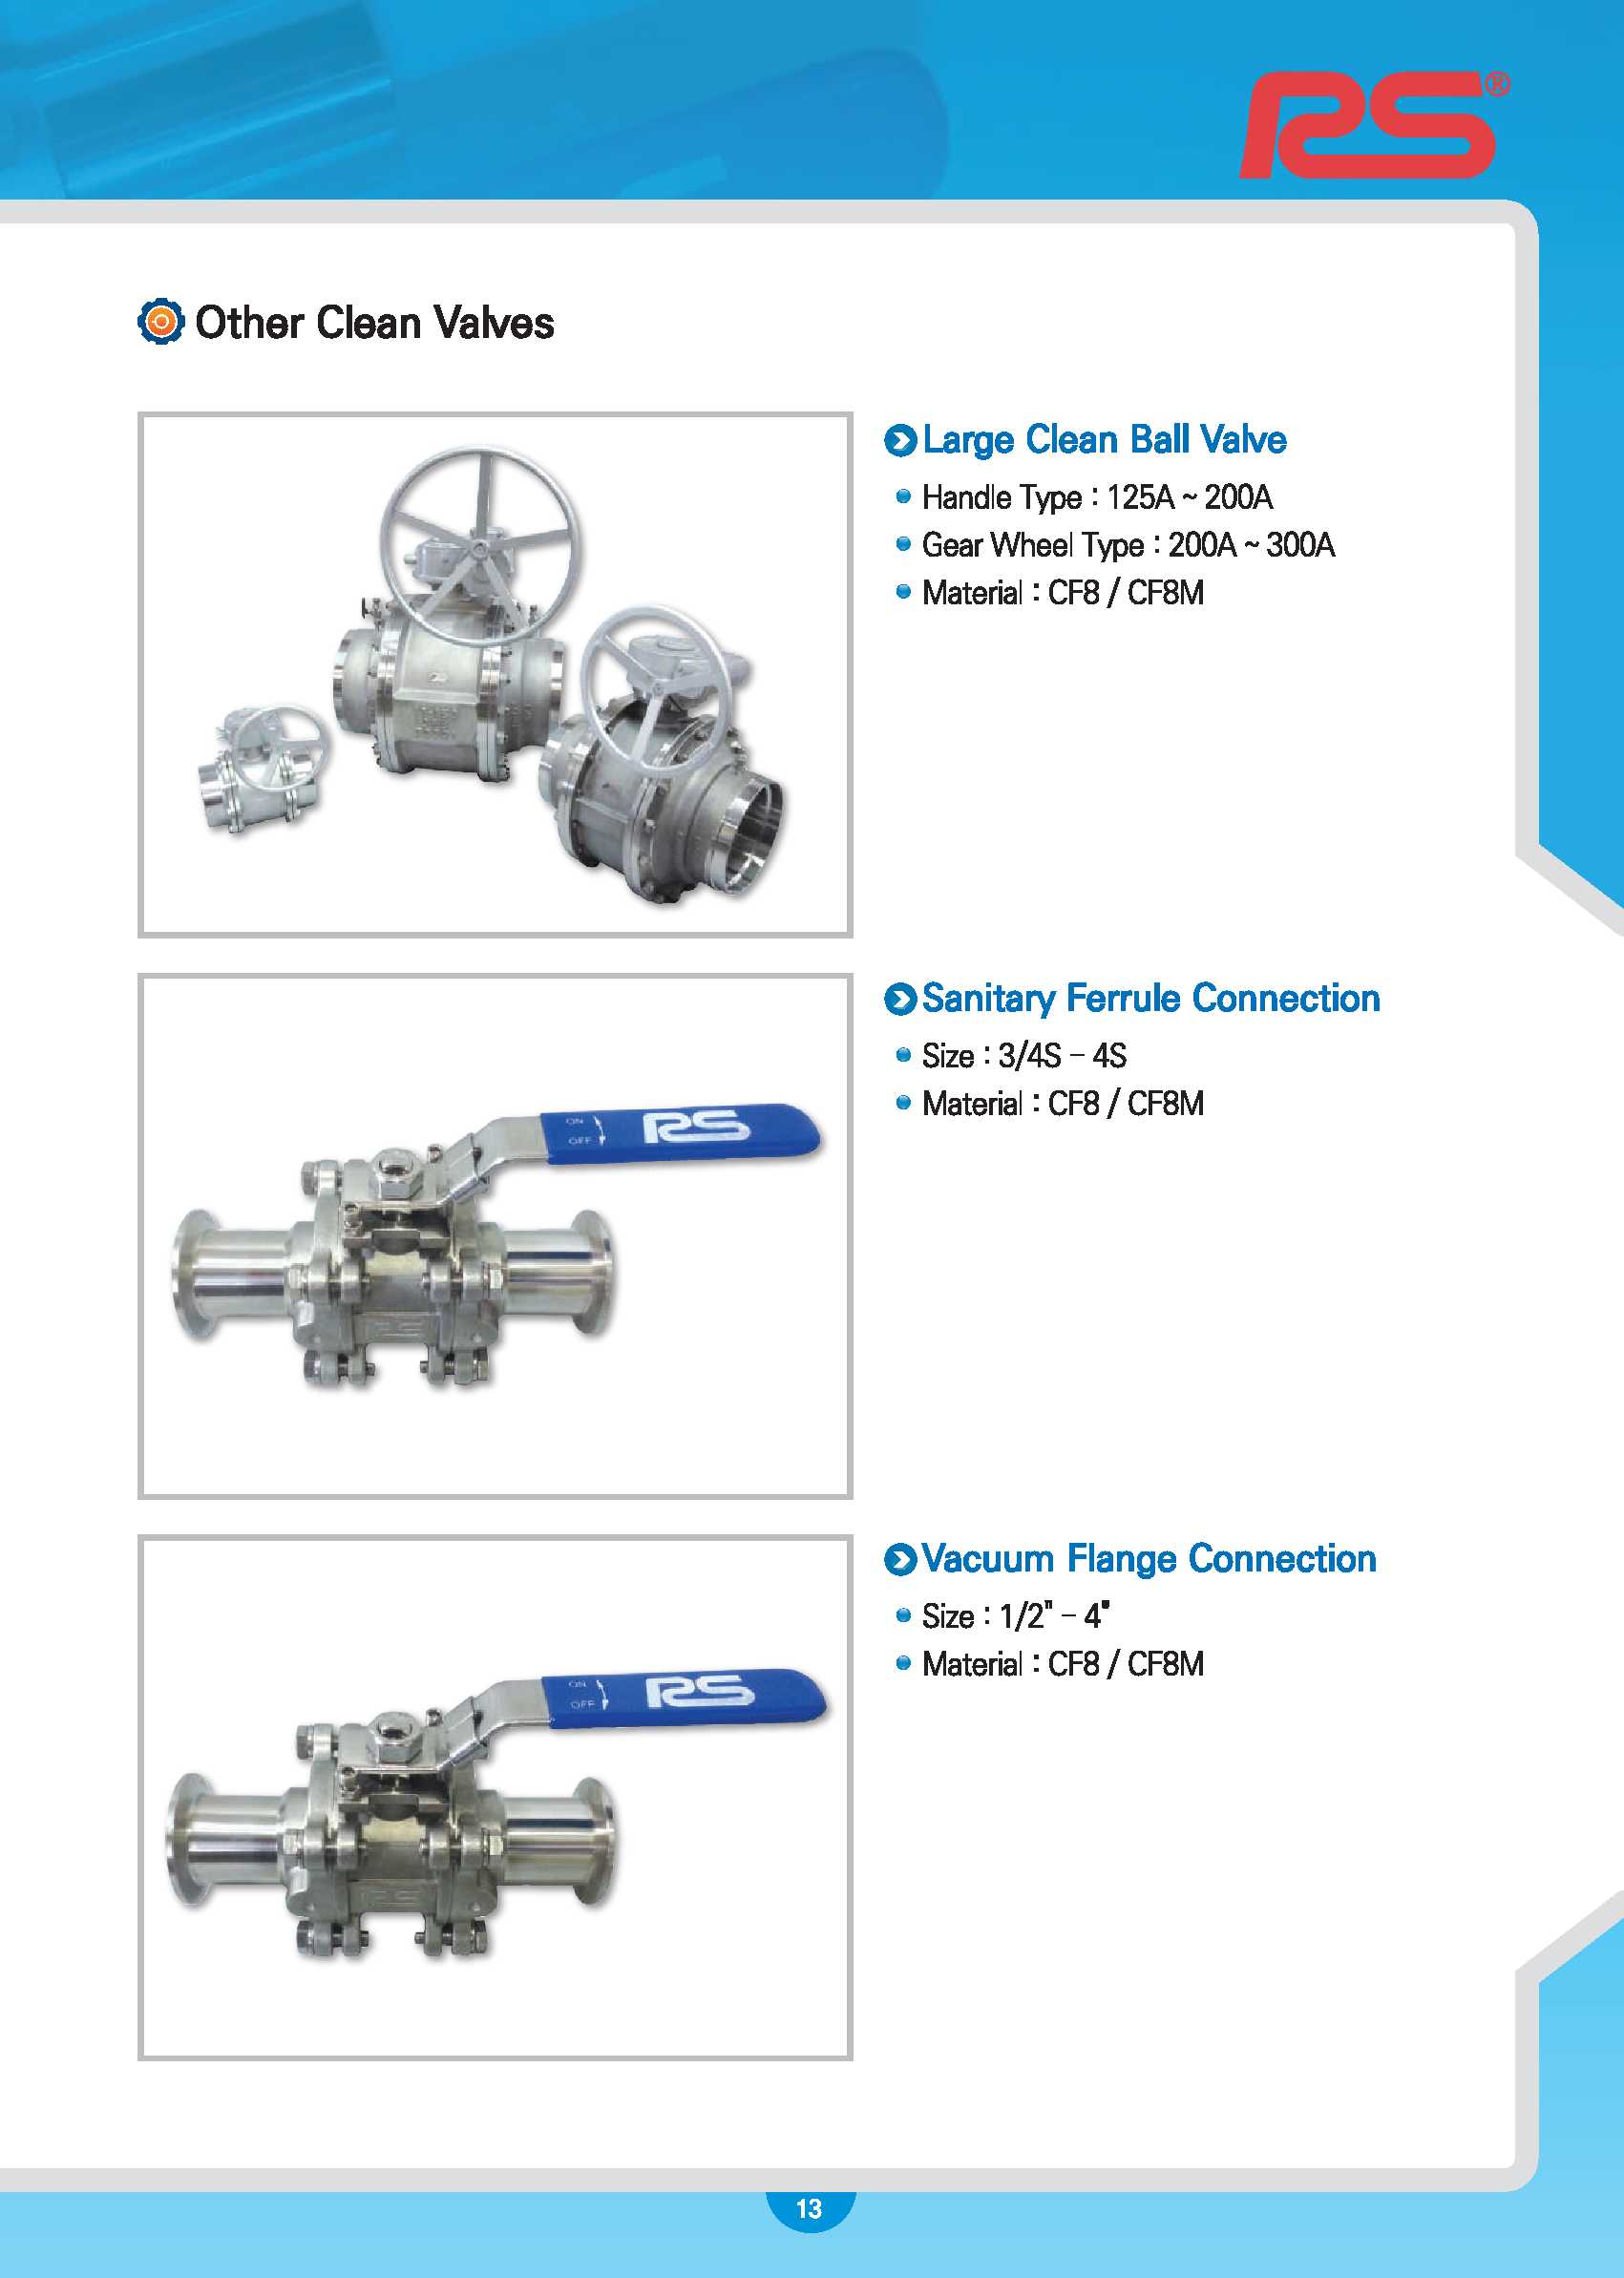 Other Clean Valves